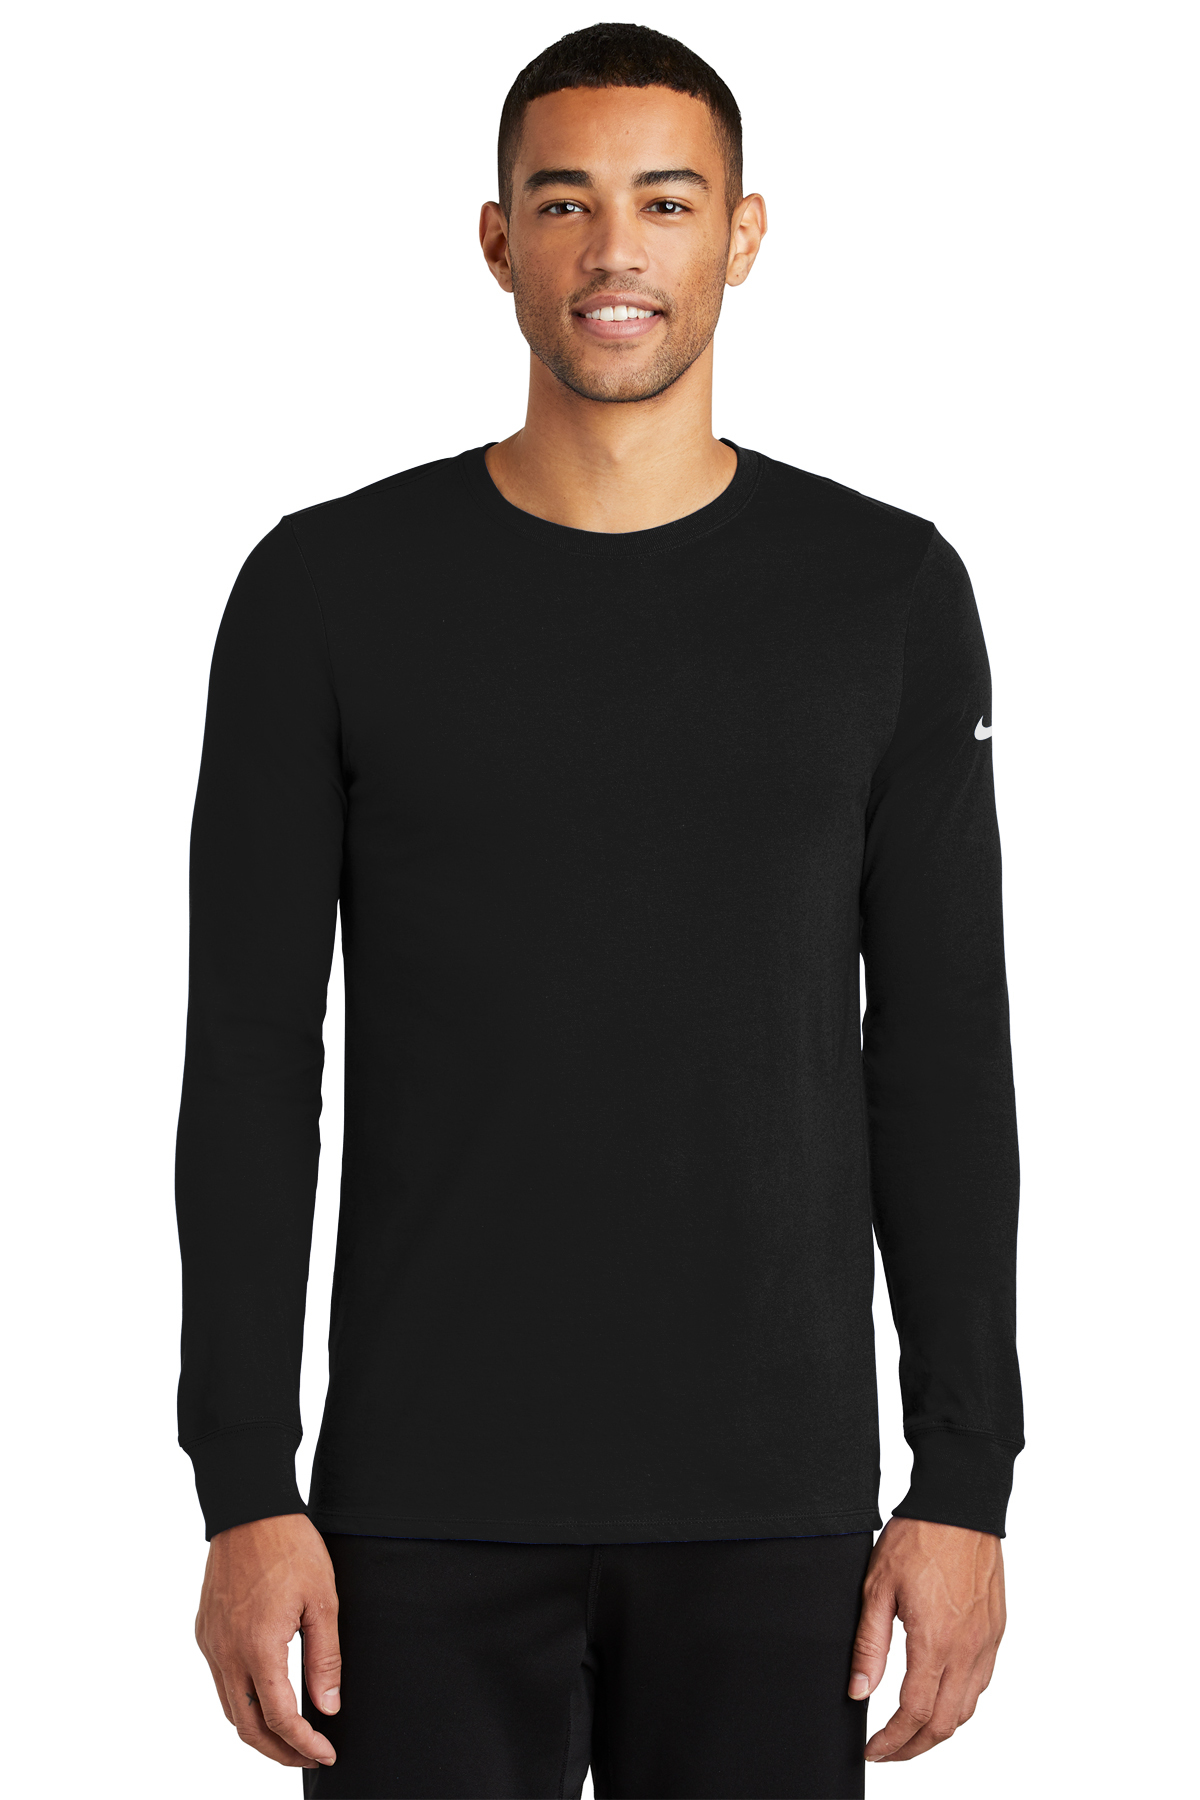 Nike Dri-FIT Cotton/Poly Long Sleeve Tee, Product